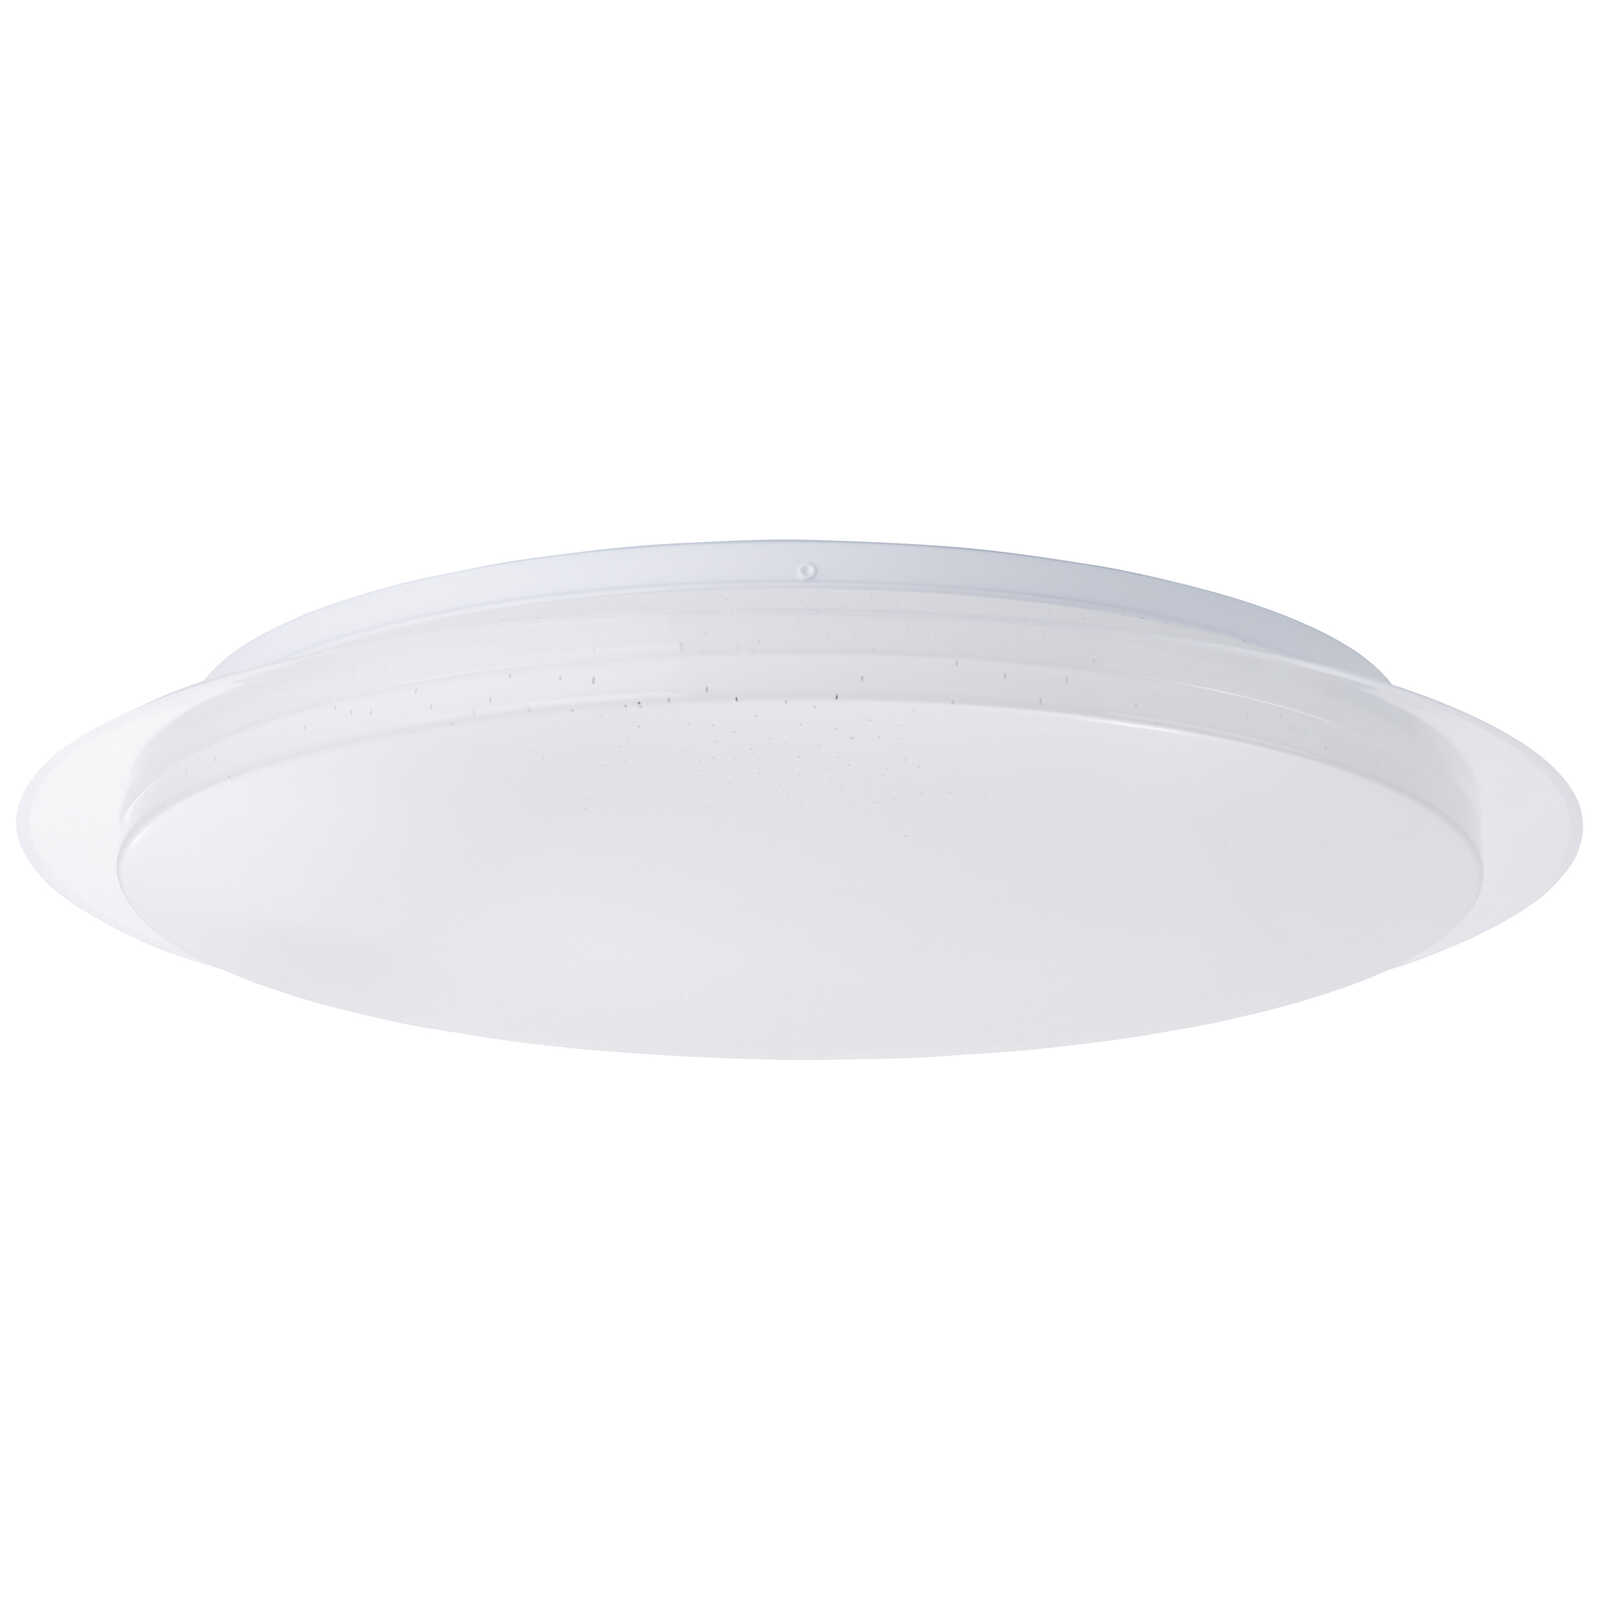             Plastic wall and ceiling light - Theo 3 - White
        